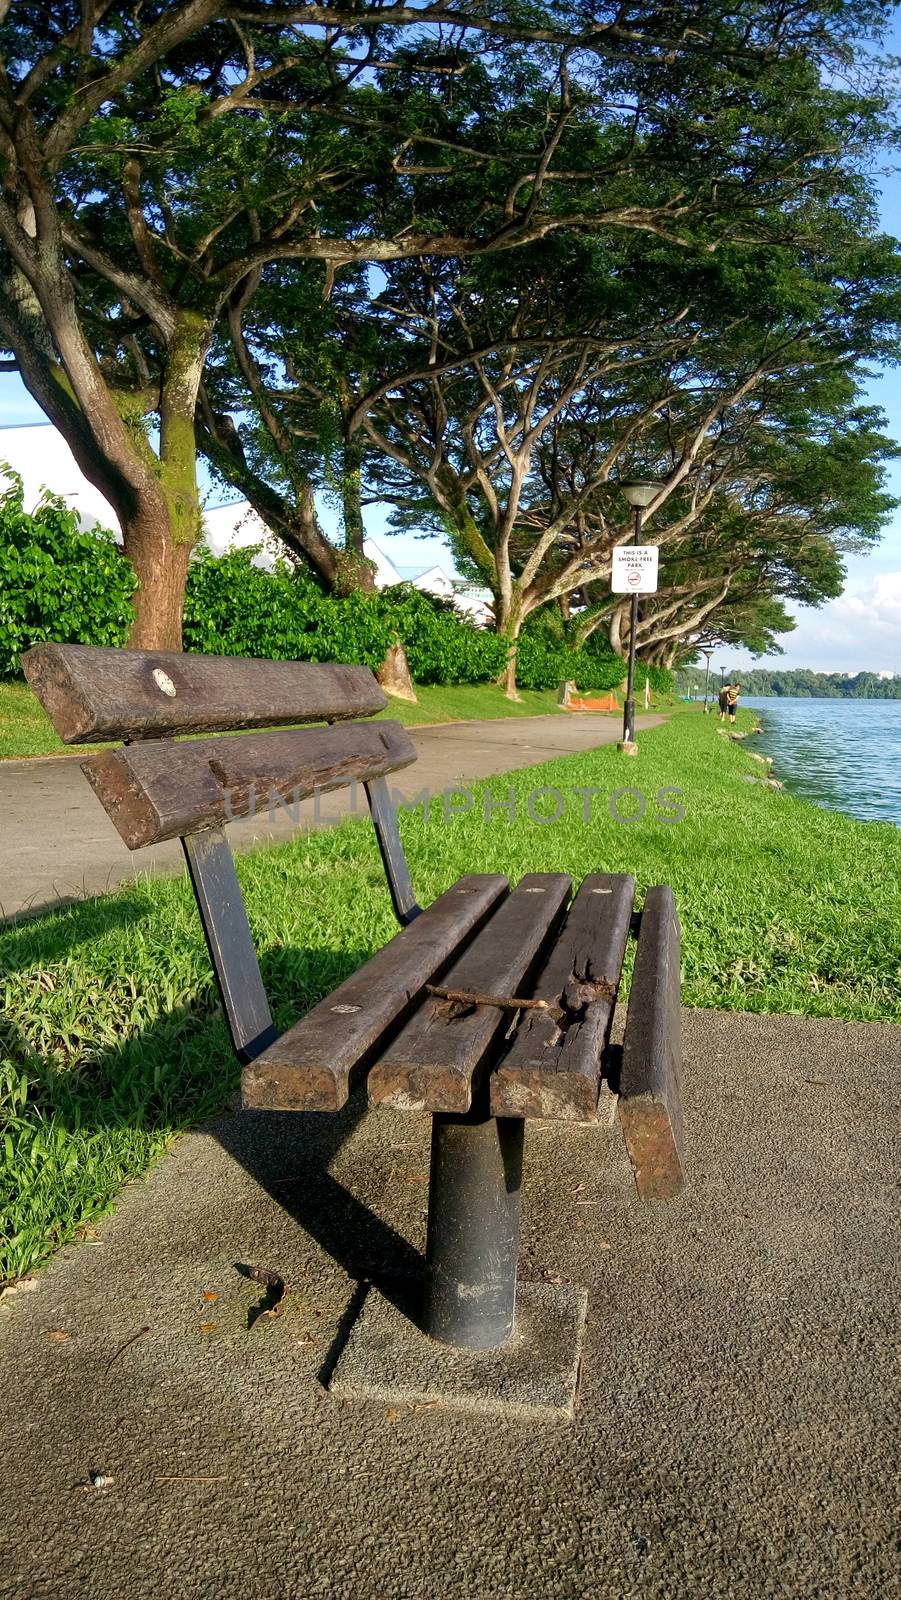 Kranji reservoir in Singapore during hot afternoon